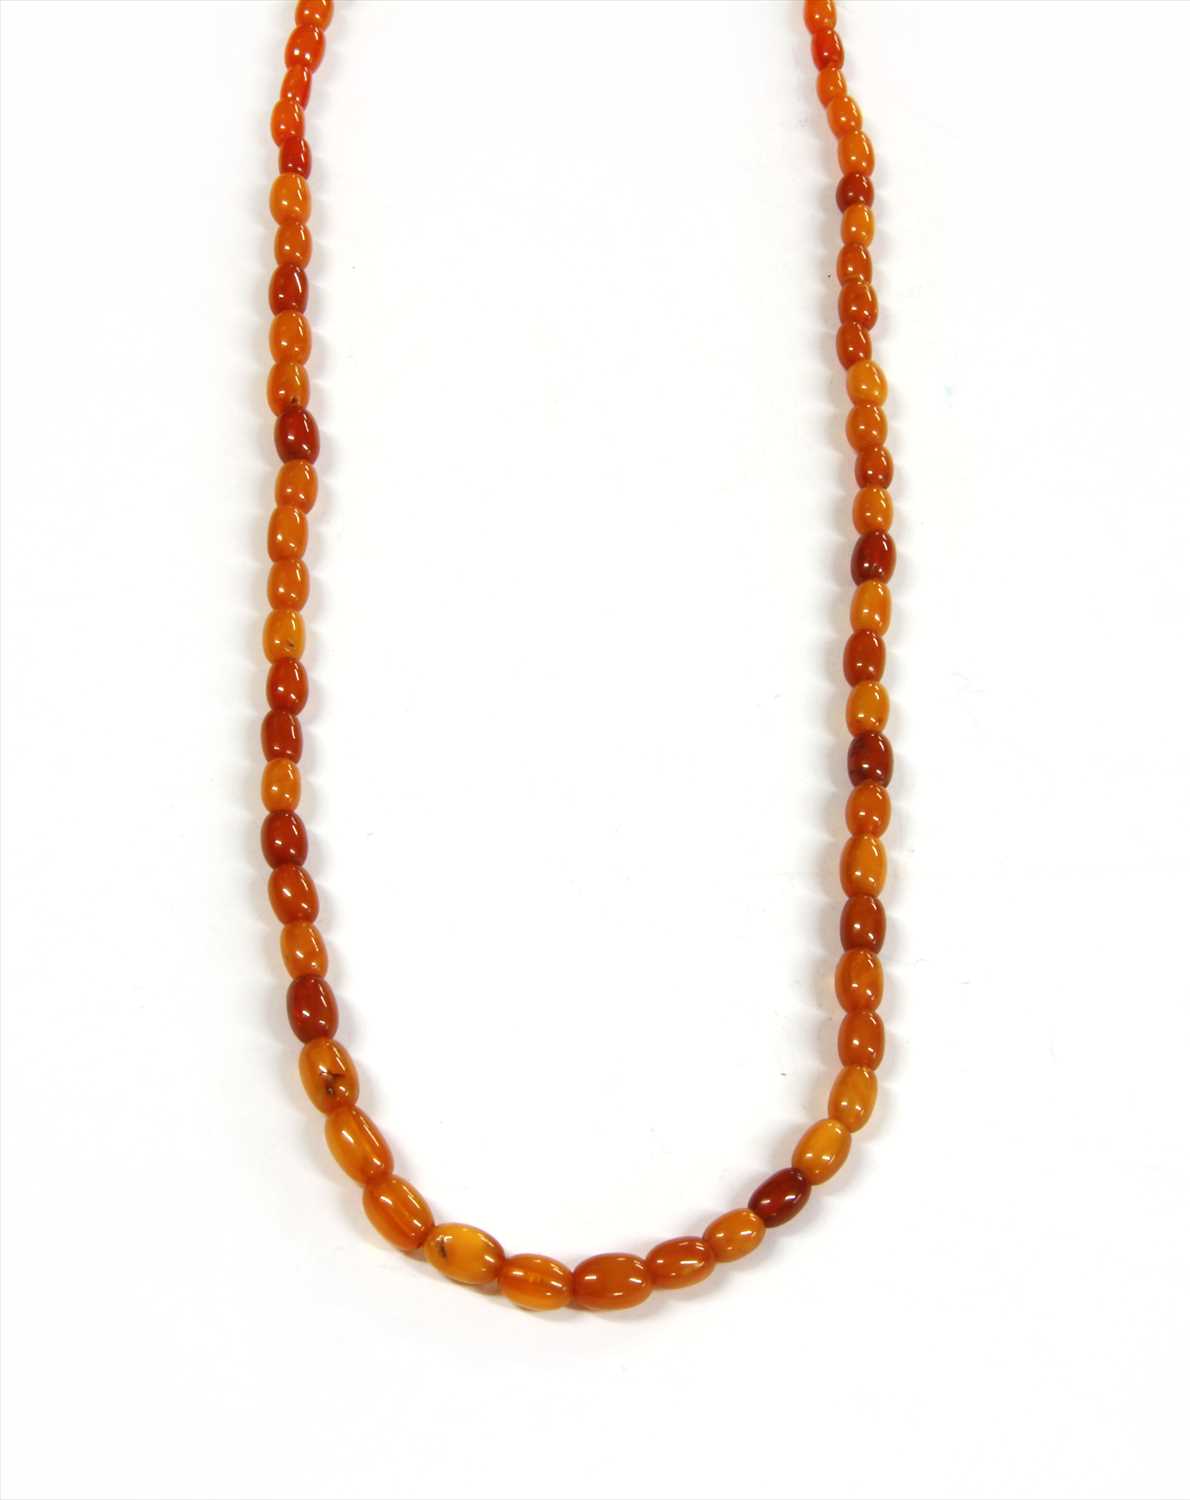 Lot 18 - A single row amber bead necklace